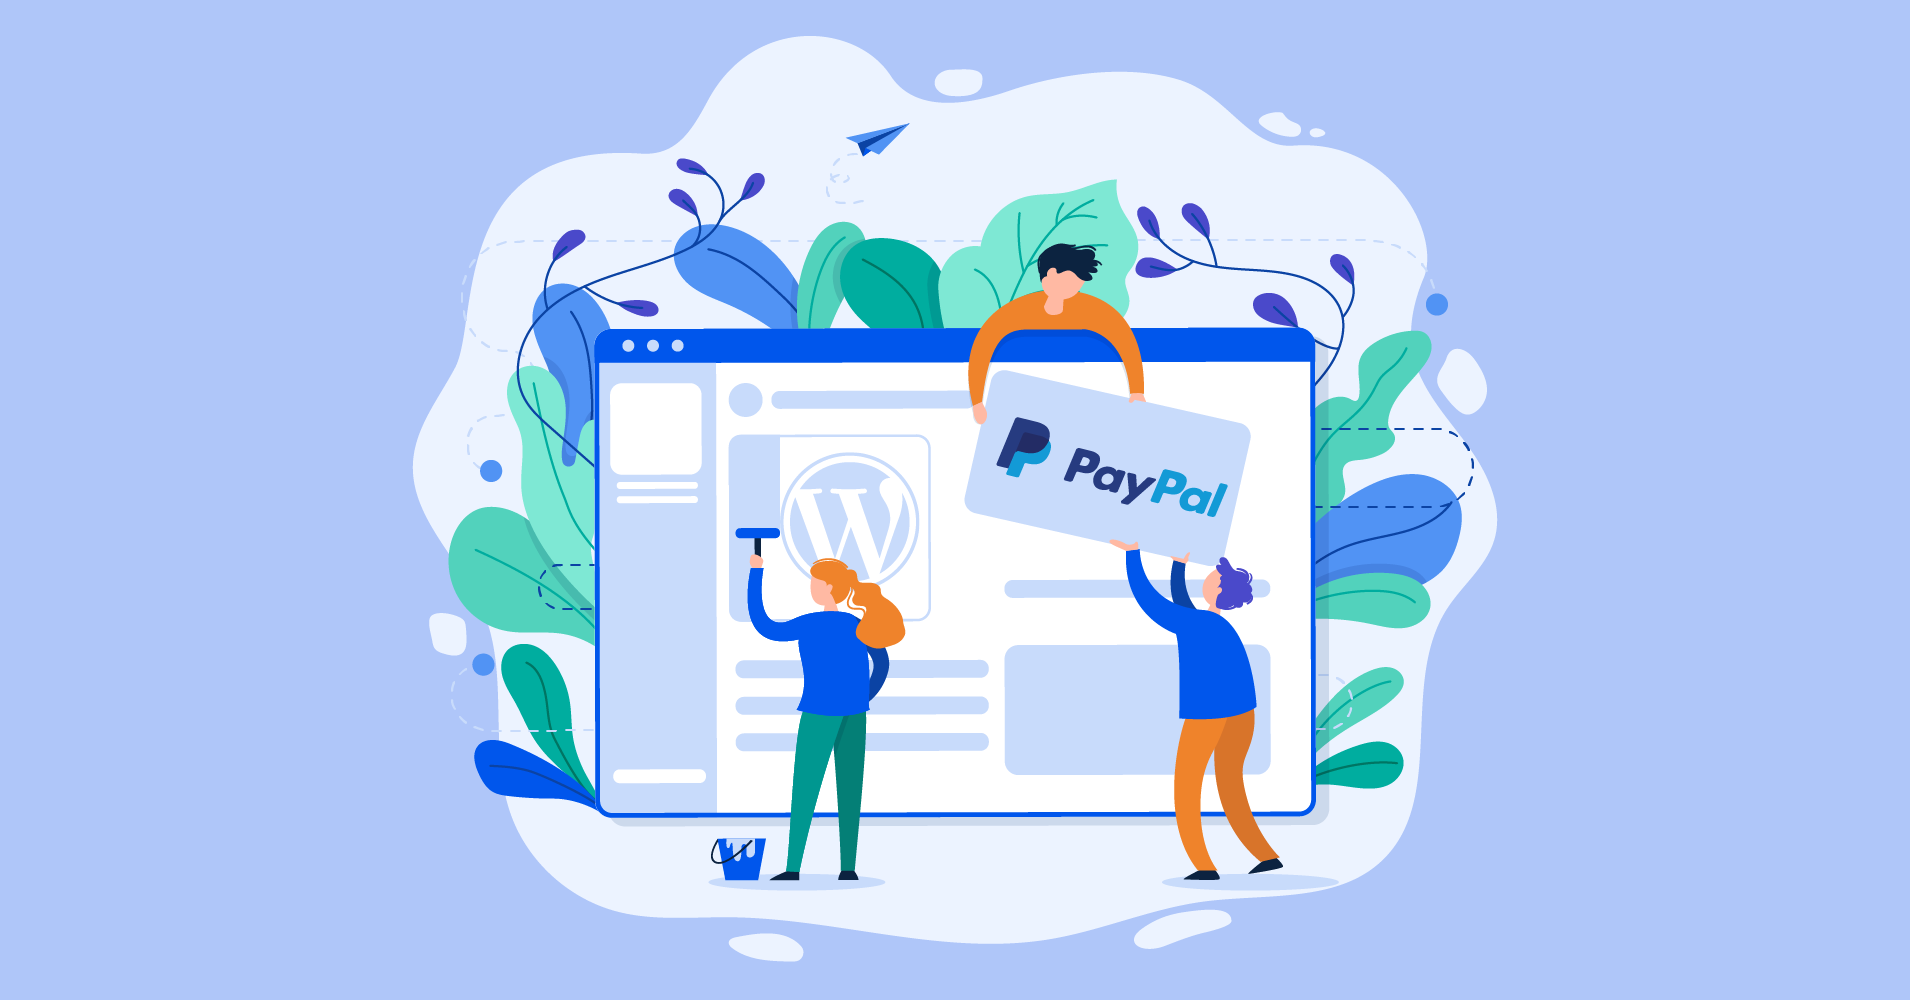 How to connect PayPal into WordPress